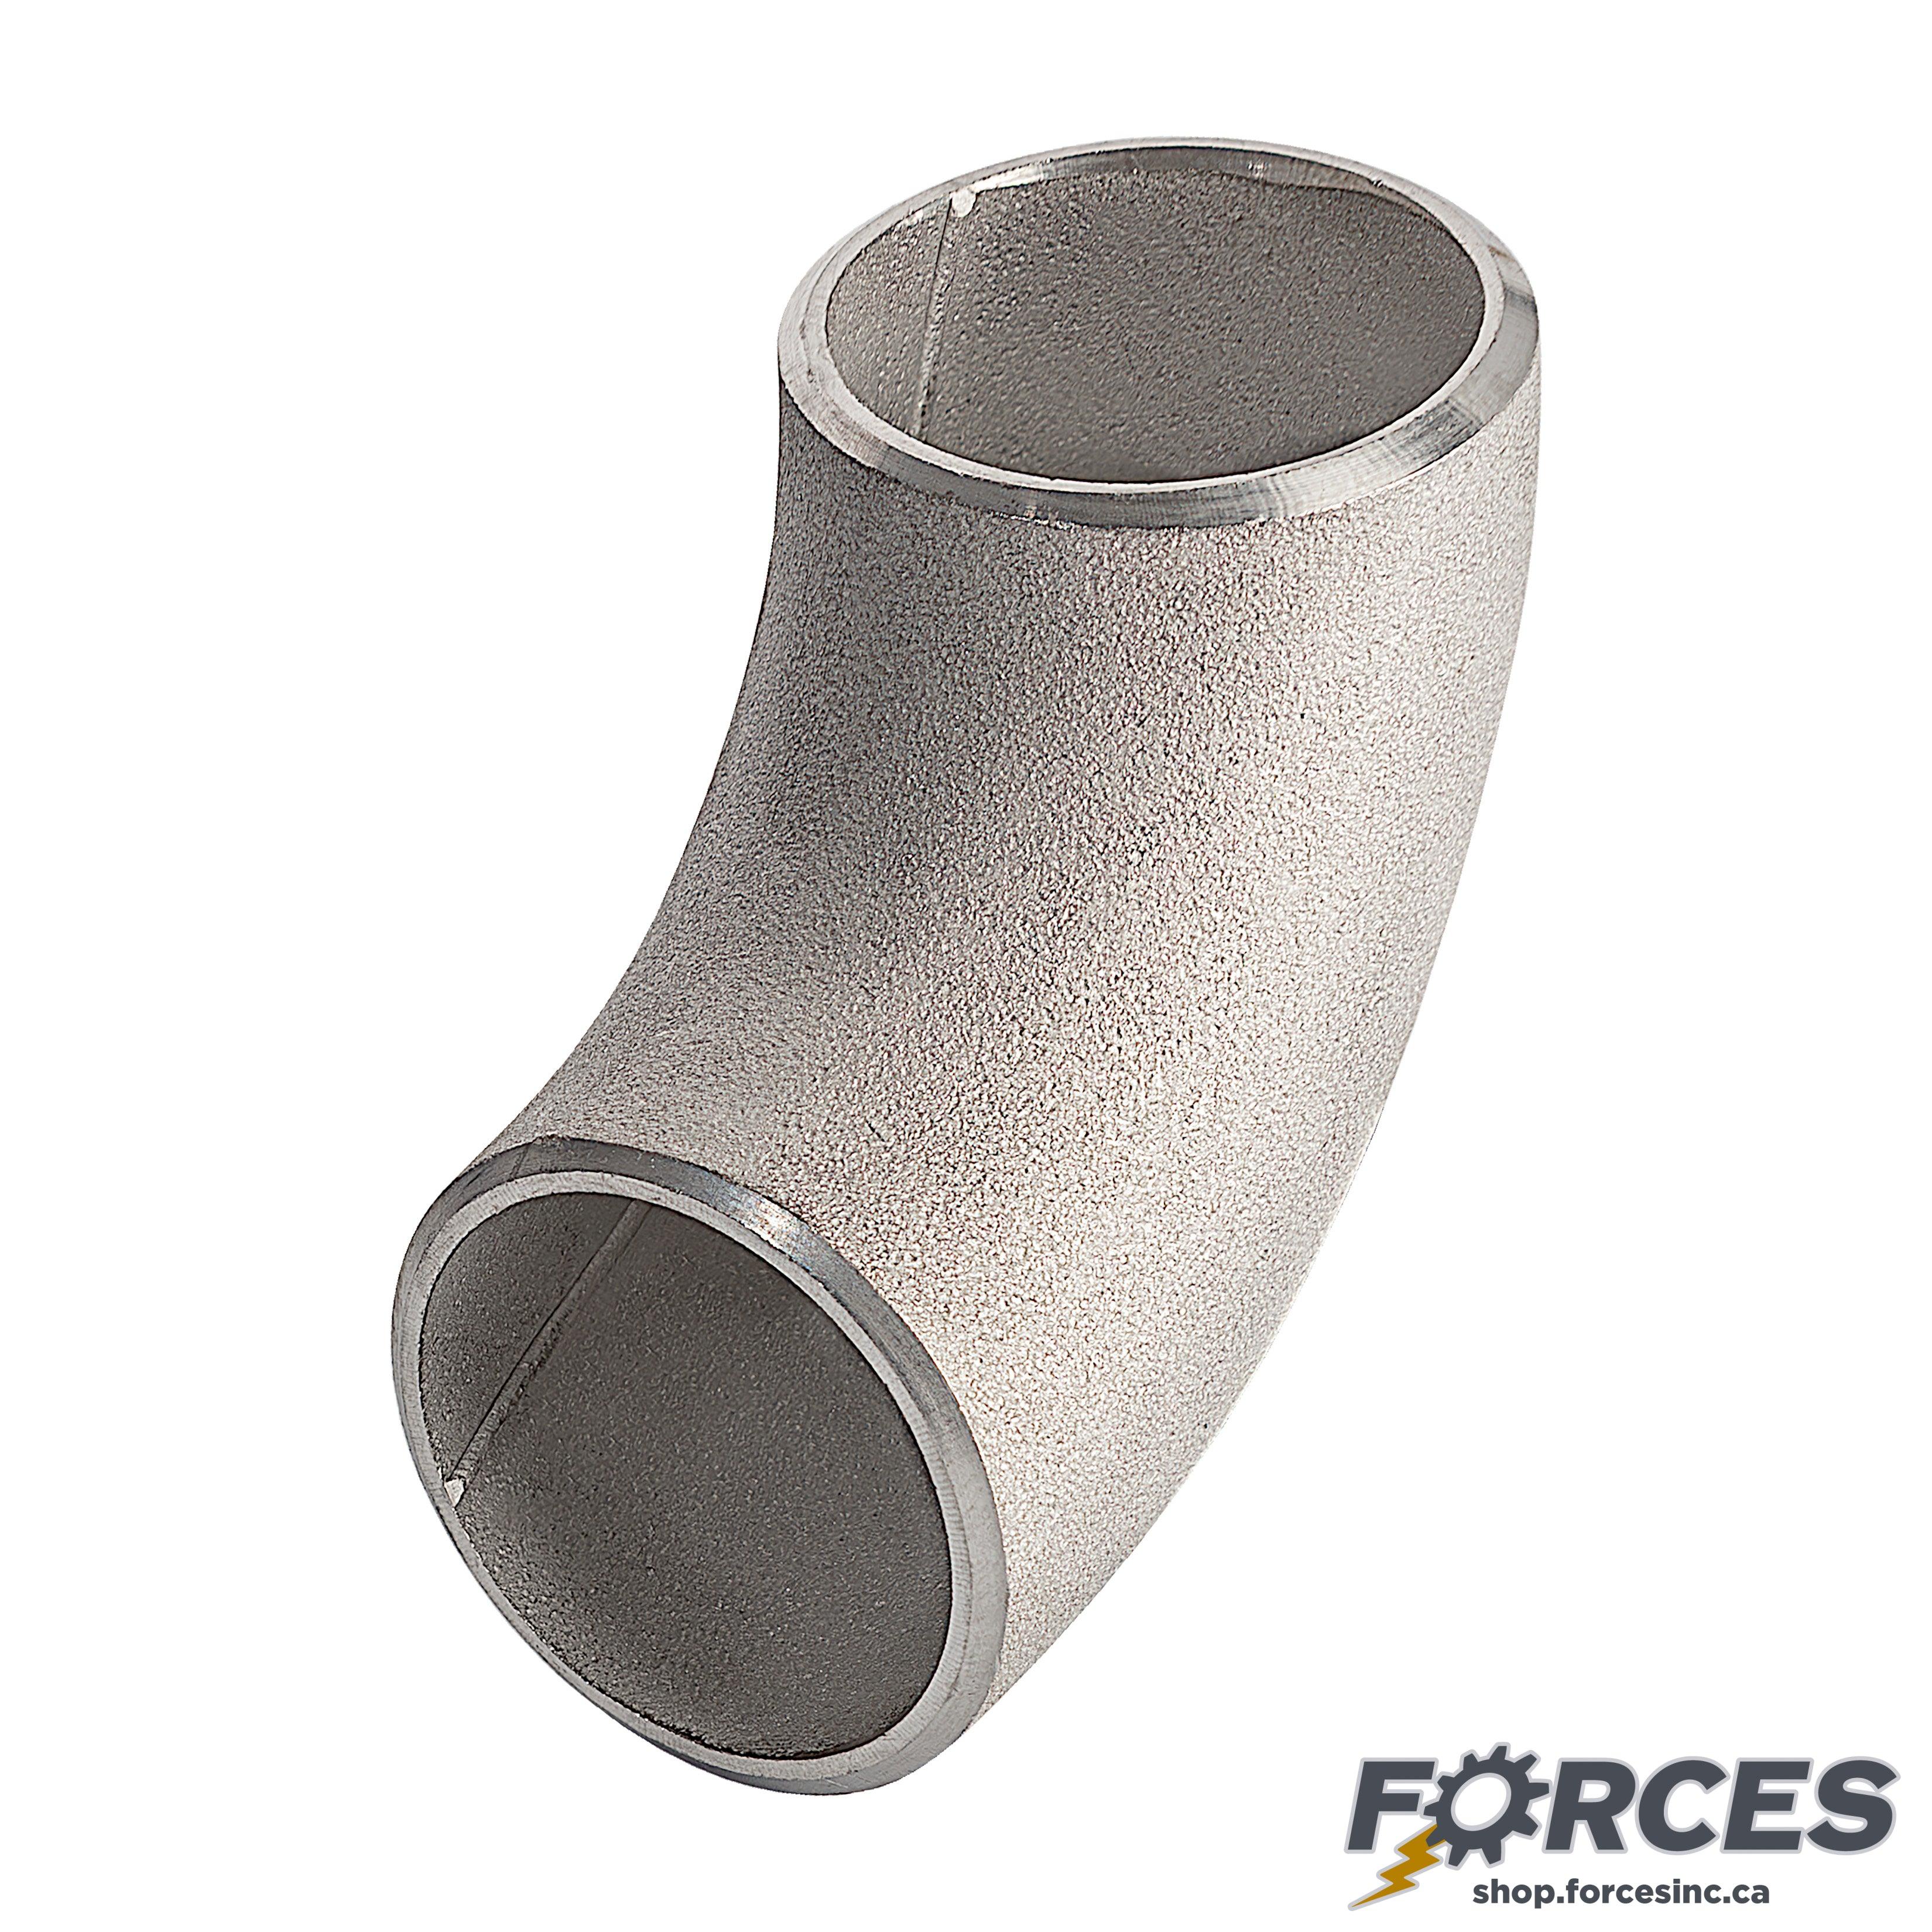 3-1/2" Elbow 90° SCH 40 Butt Weld - Stainless Steel 316 - Forces Inc